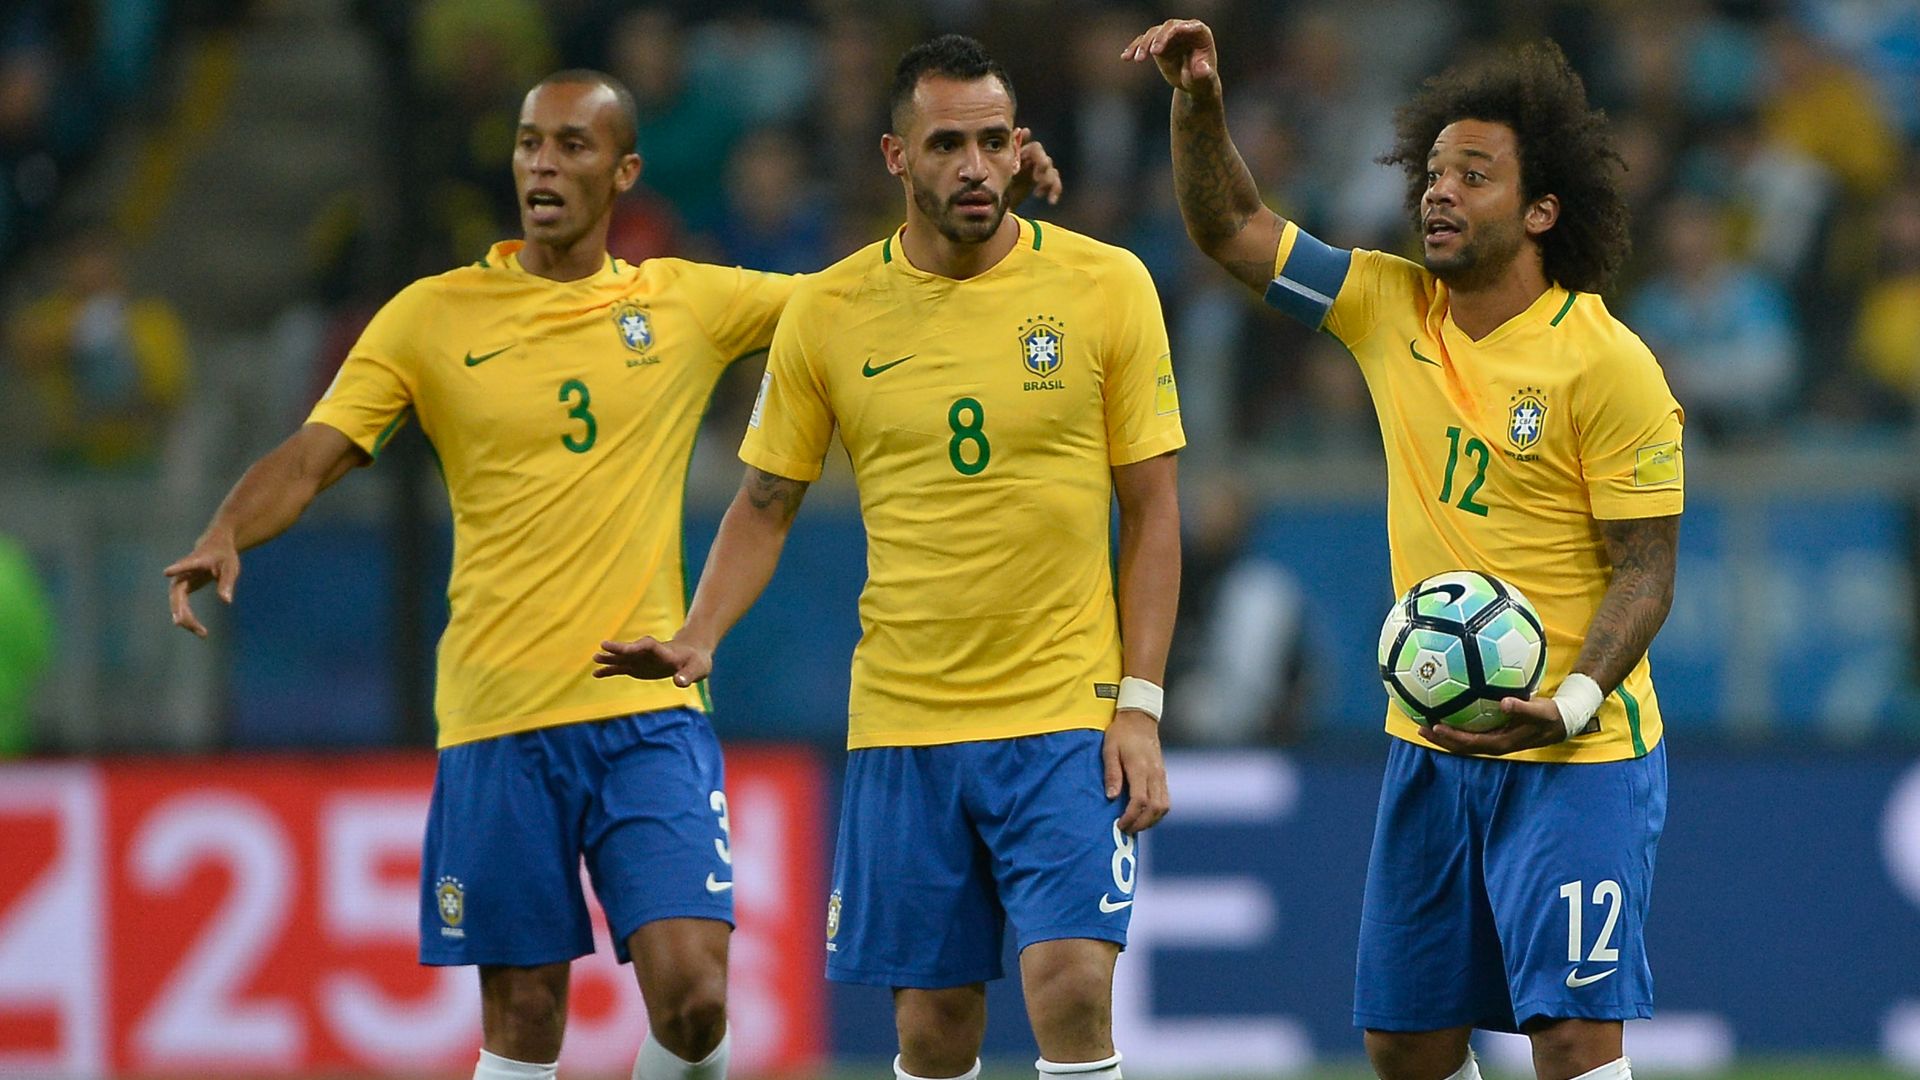 Has the time come for Brazil to select a permanent captain?